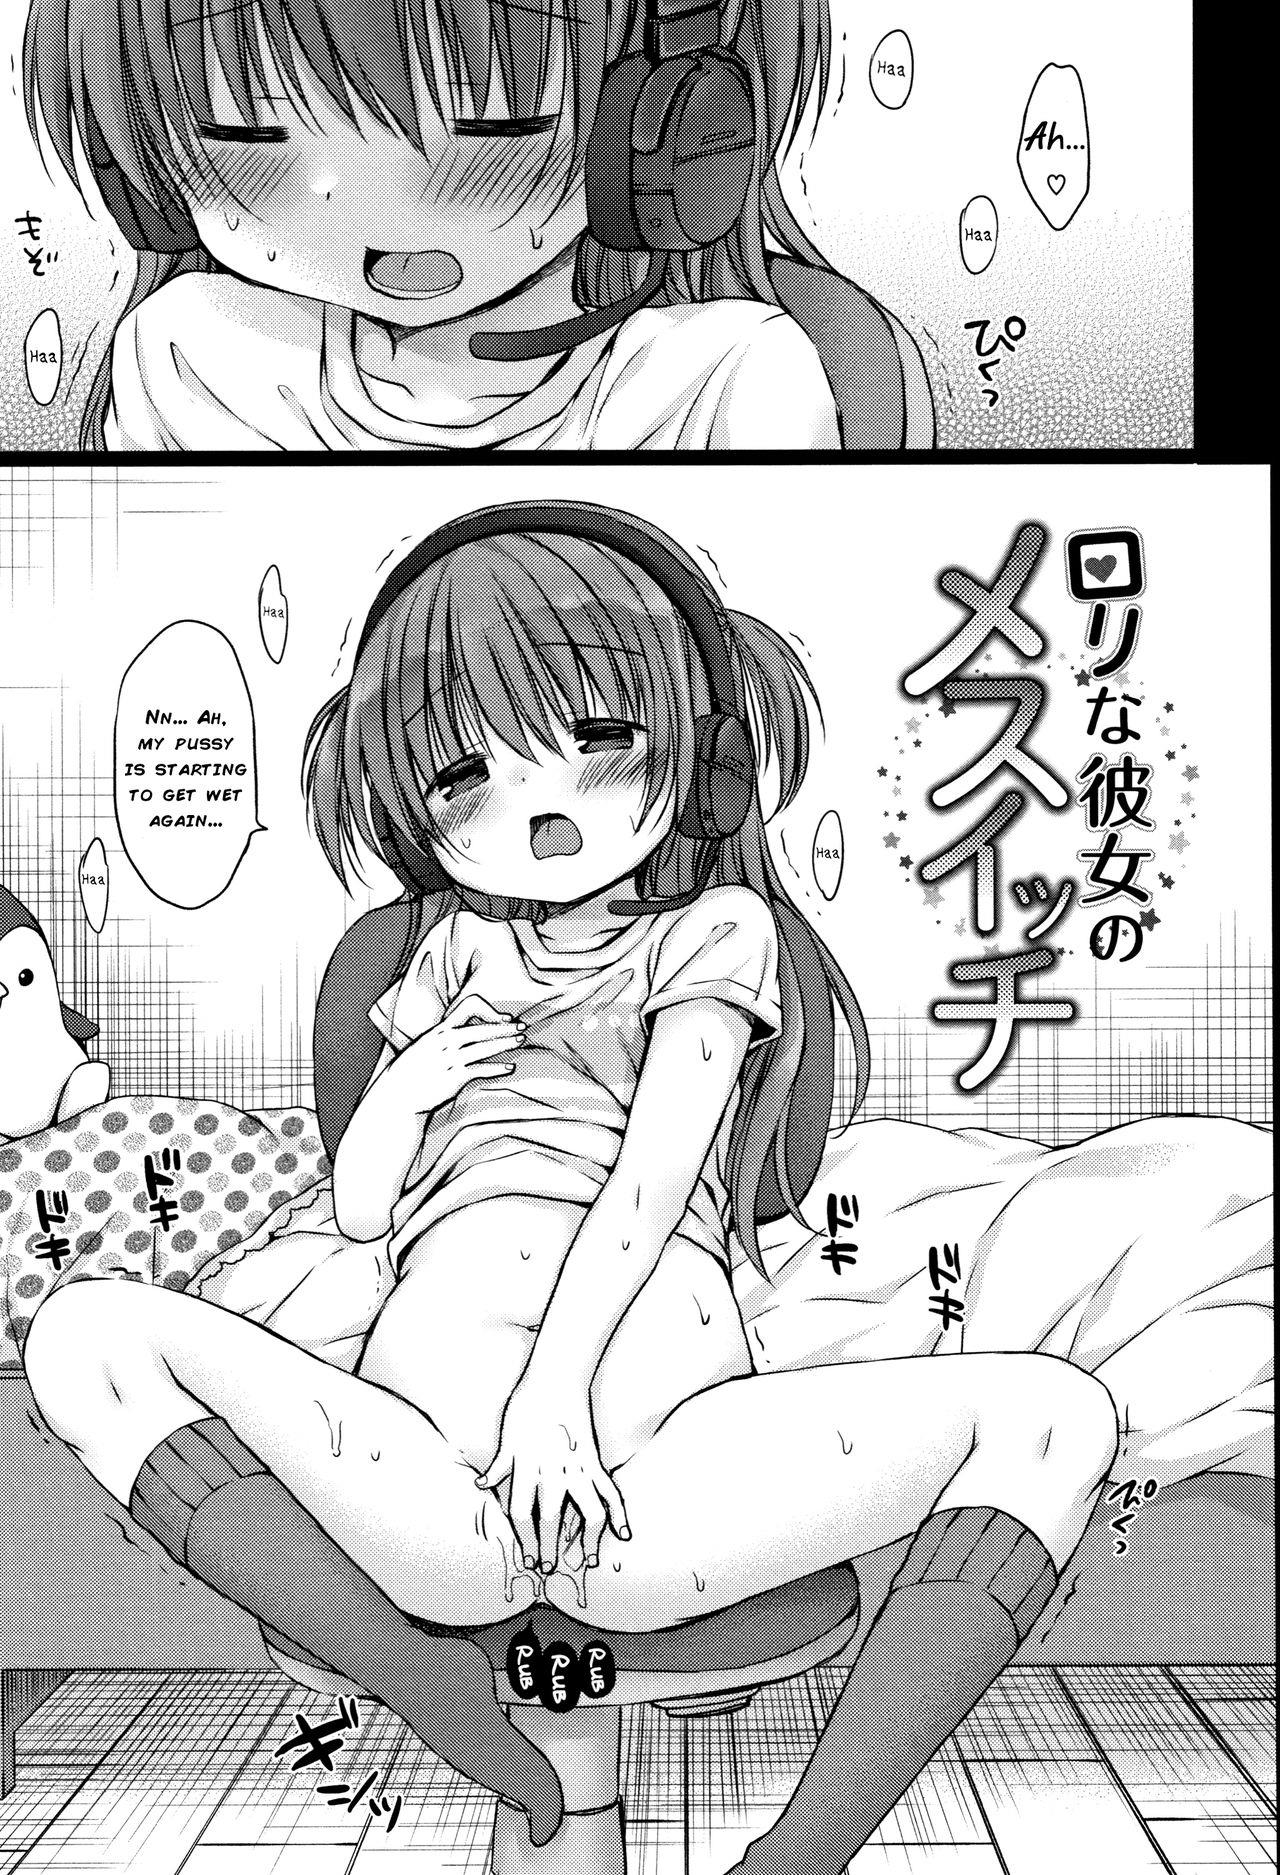 Chiisana Kanojo No Meswitch Vol.1 Chapter 3: My Loli Girlfriend And Her Female Instinct - Picture 1